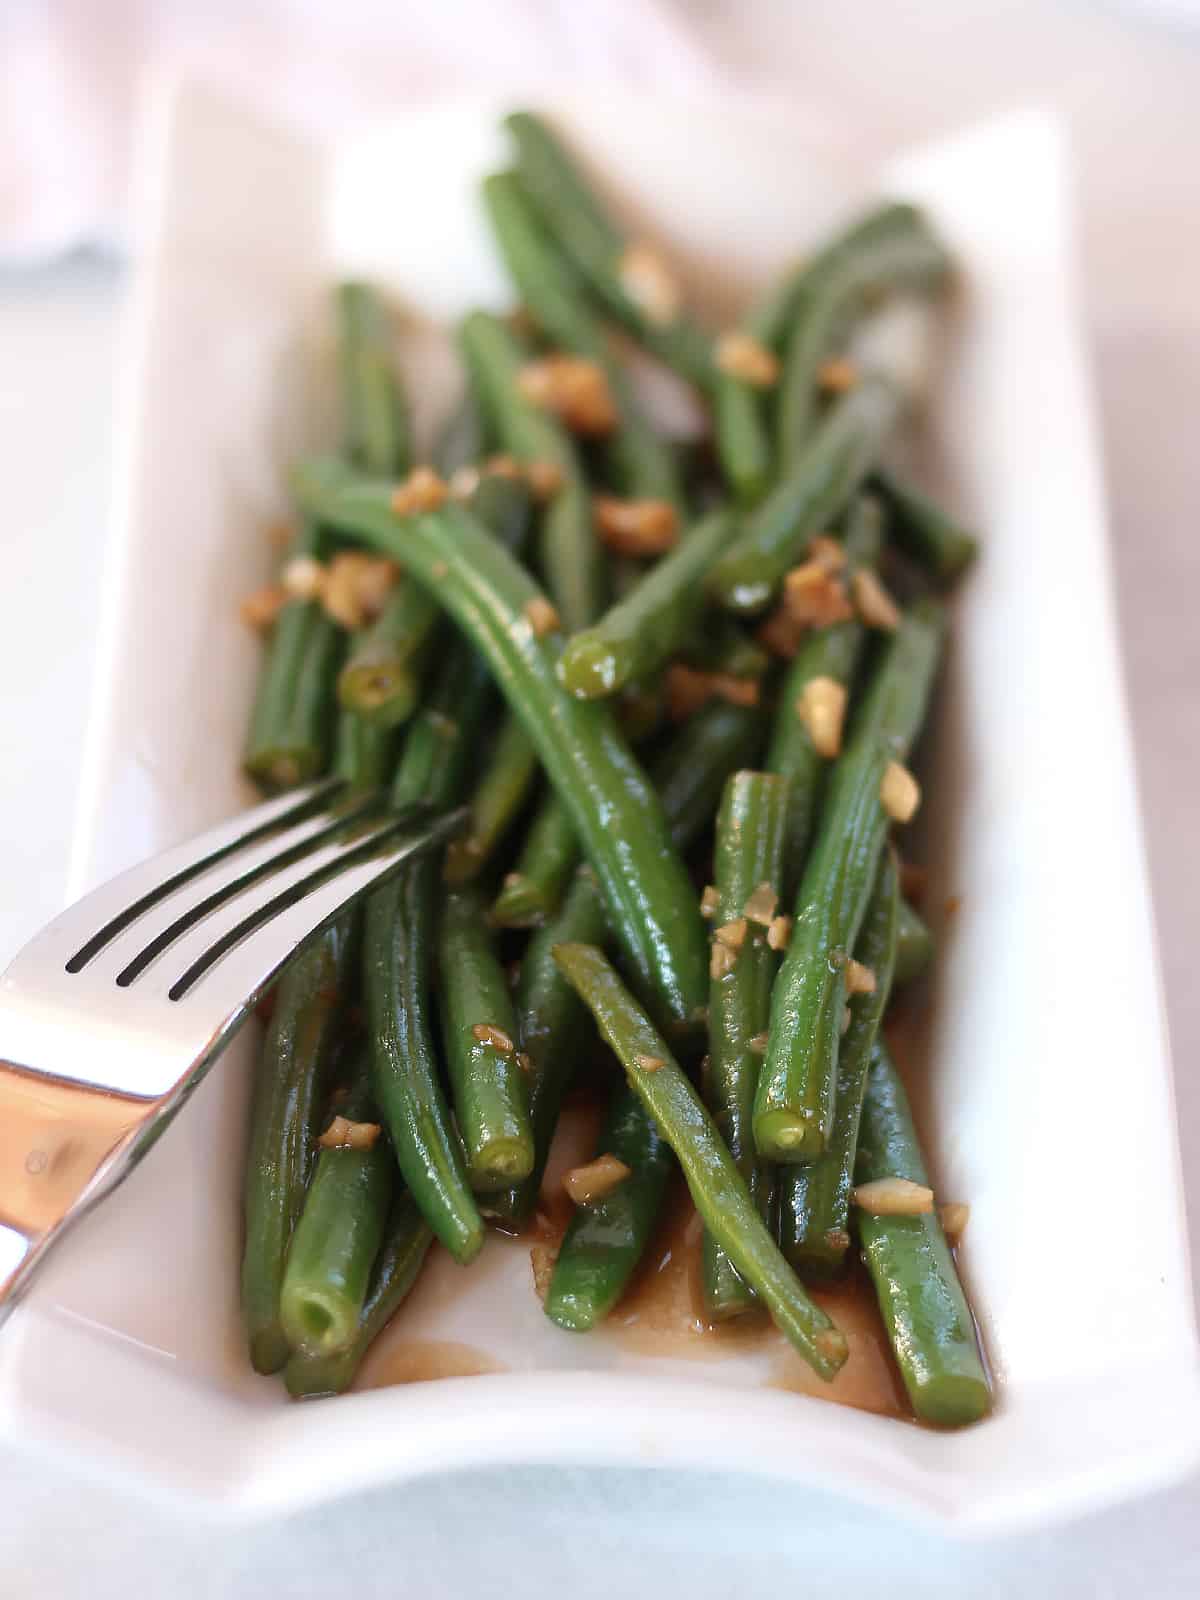 Green beans cooked with balsamic and garlic served in a white plate with a fork.